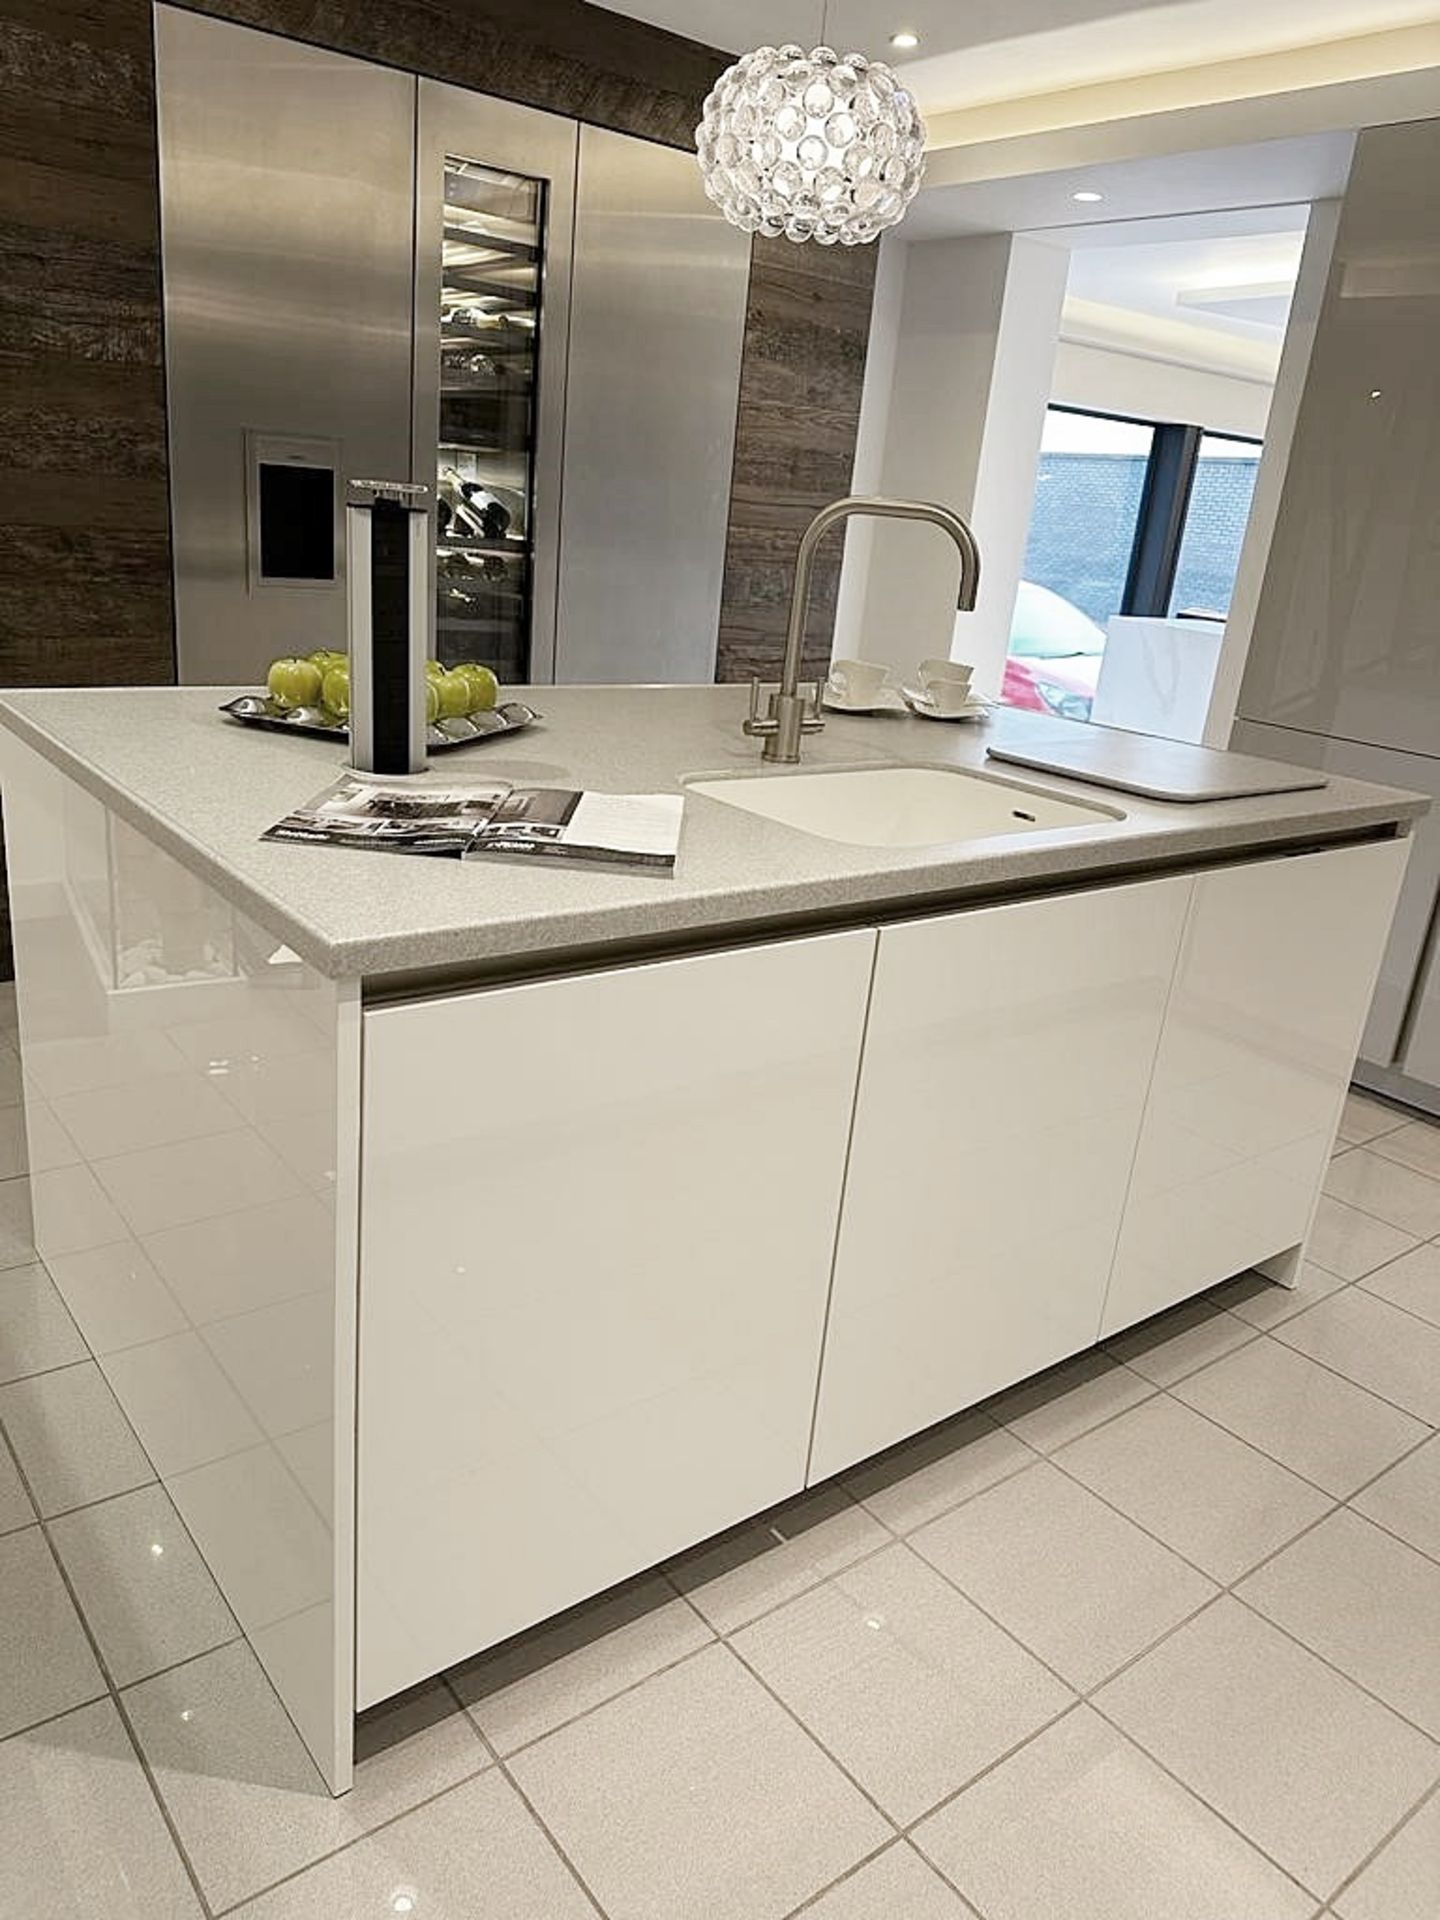 1 x SIEMATIC Contemporary 'S2' Fitted Kitchen In Gloss White And Grey *Ex-Display Showroom Model* - Image 3 of 16